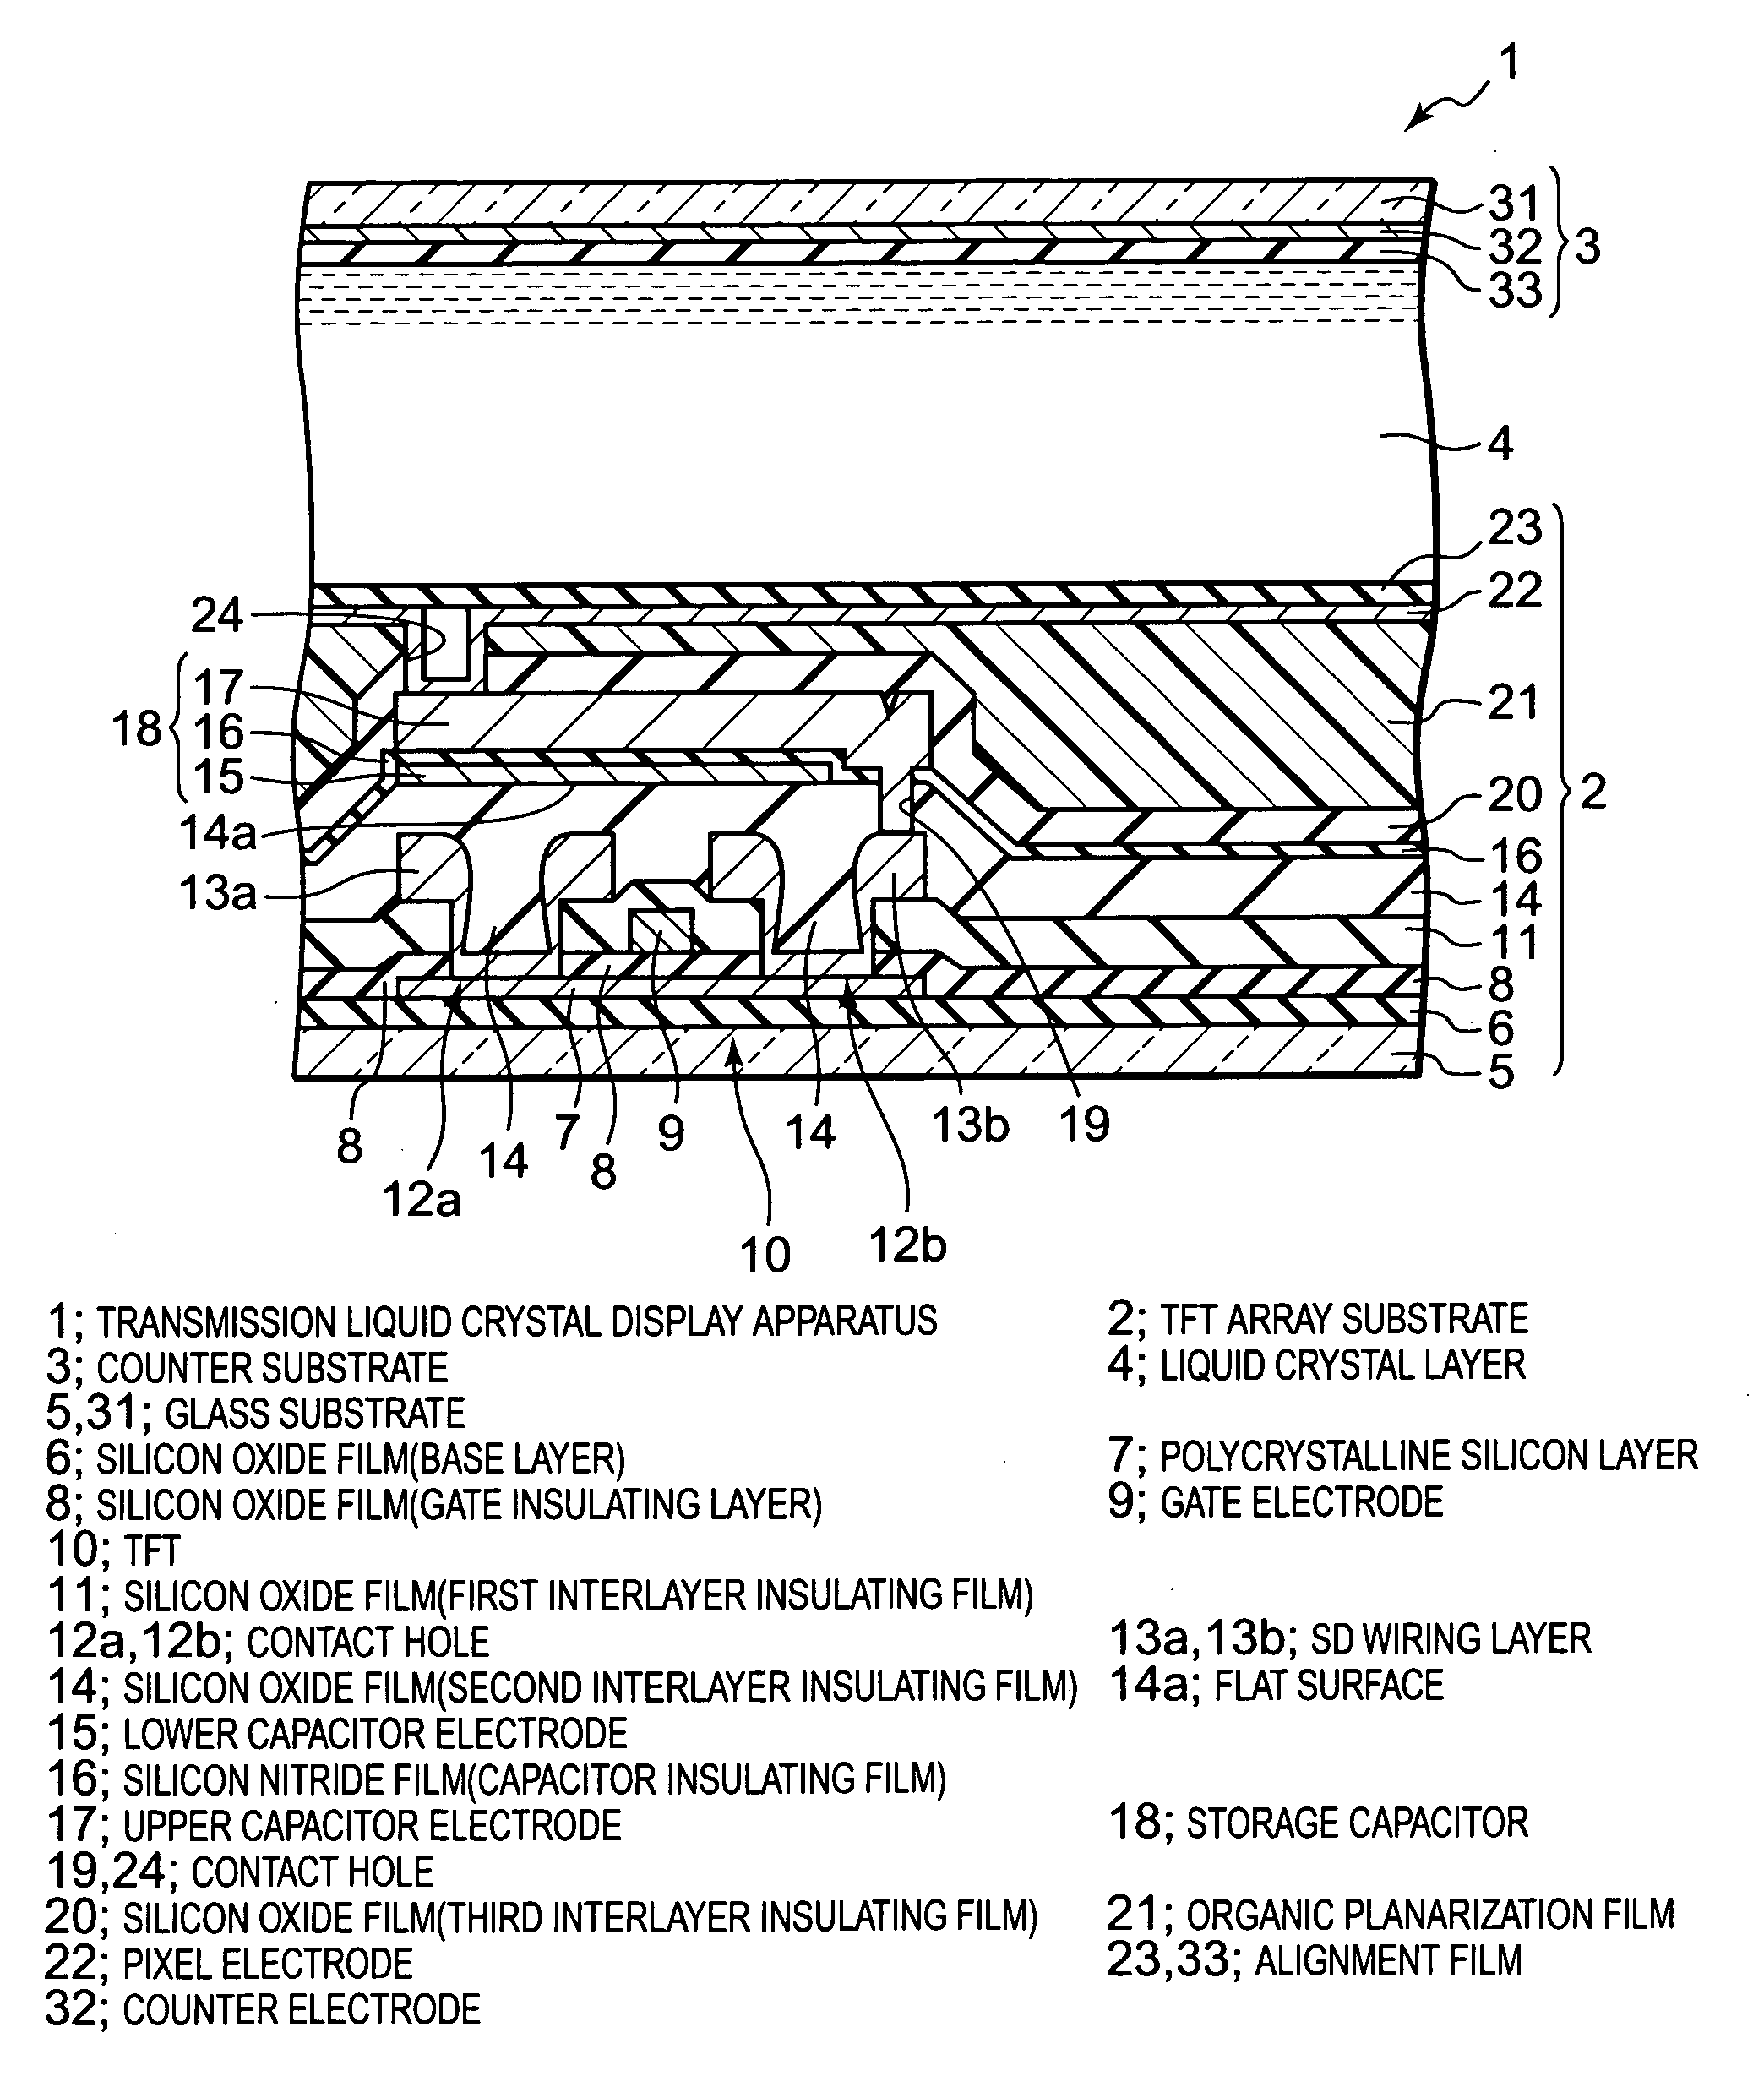 Pixel circuit substrate, liquid crystal display apparatus, method of manufacturing the same and projection display apparatus